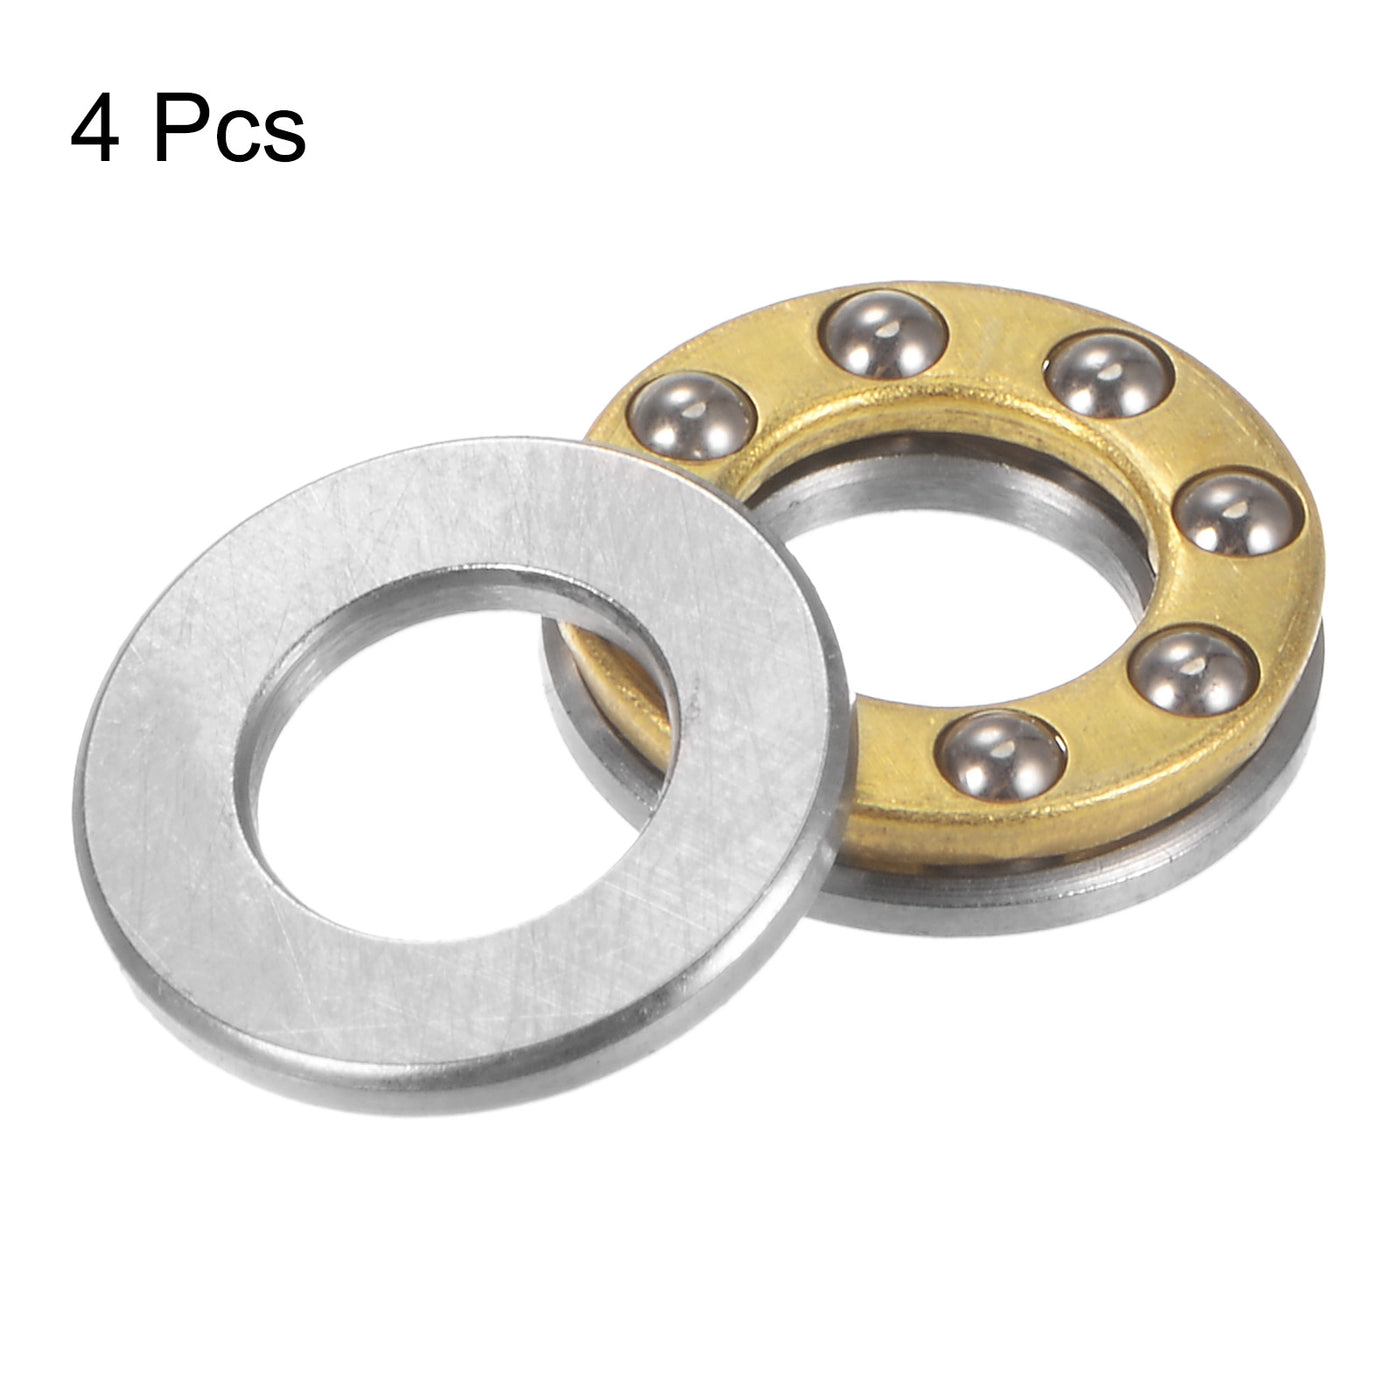 uxcell Uxcell F7-13M Thrust Ball Bearing 7x13x5mm Brass with Washers 4pcs